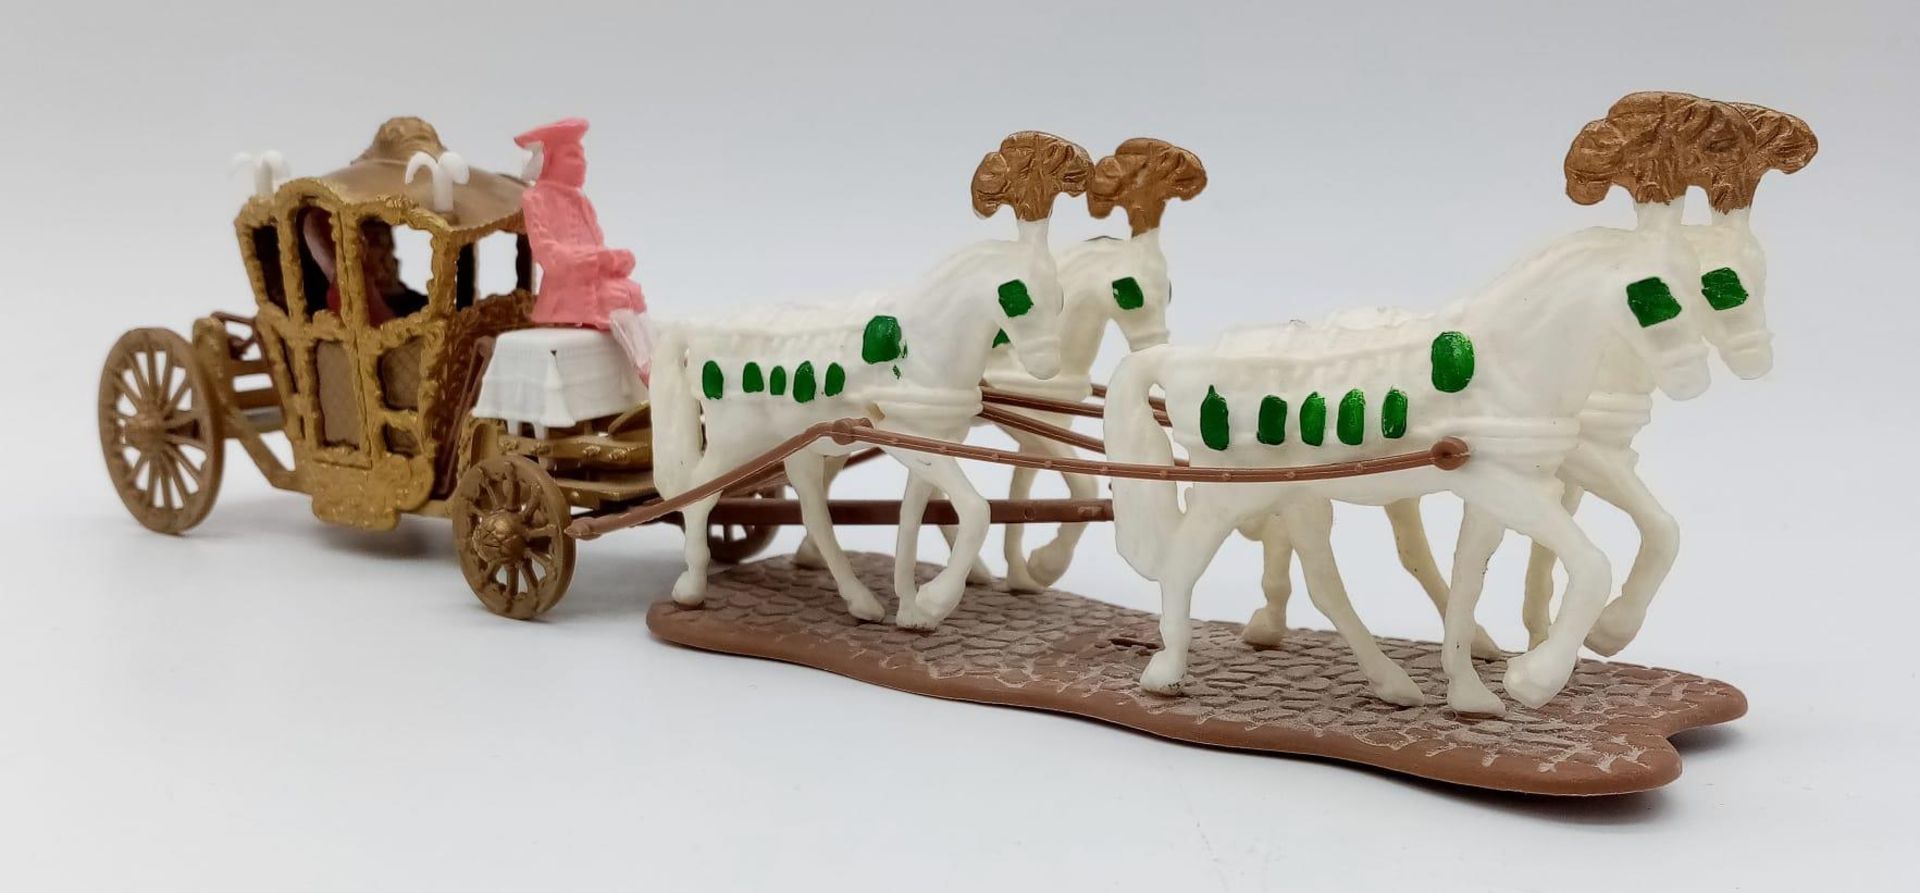 A Vintage Dinky Cinderella's Coach Model - From the movie The Slipper and the Rose. 28cm length. - Bild 5 aus 9